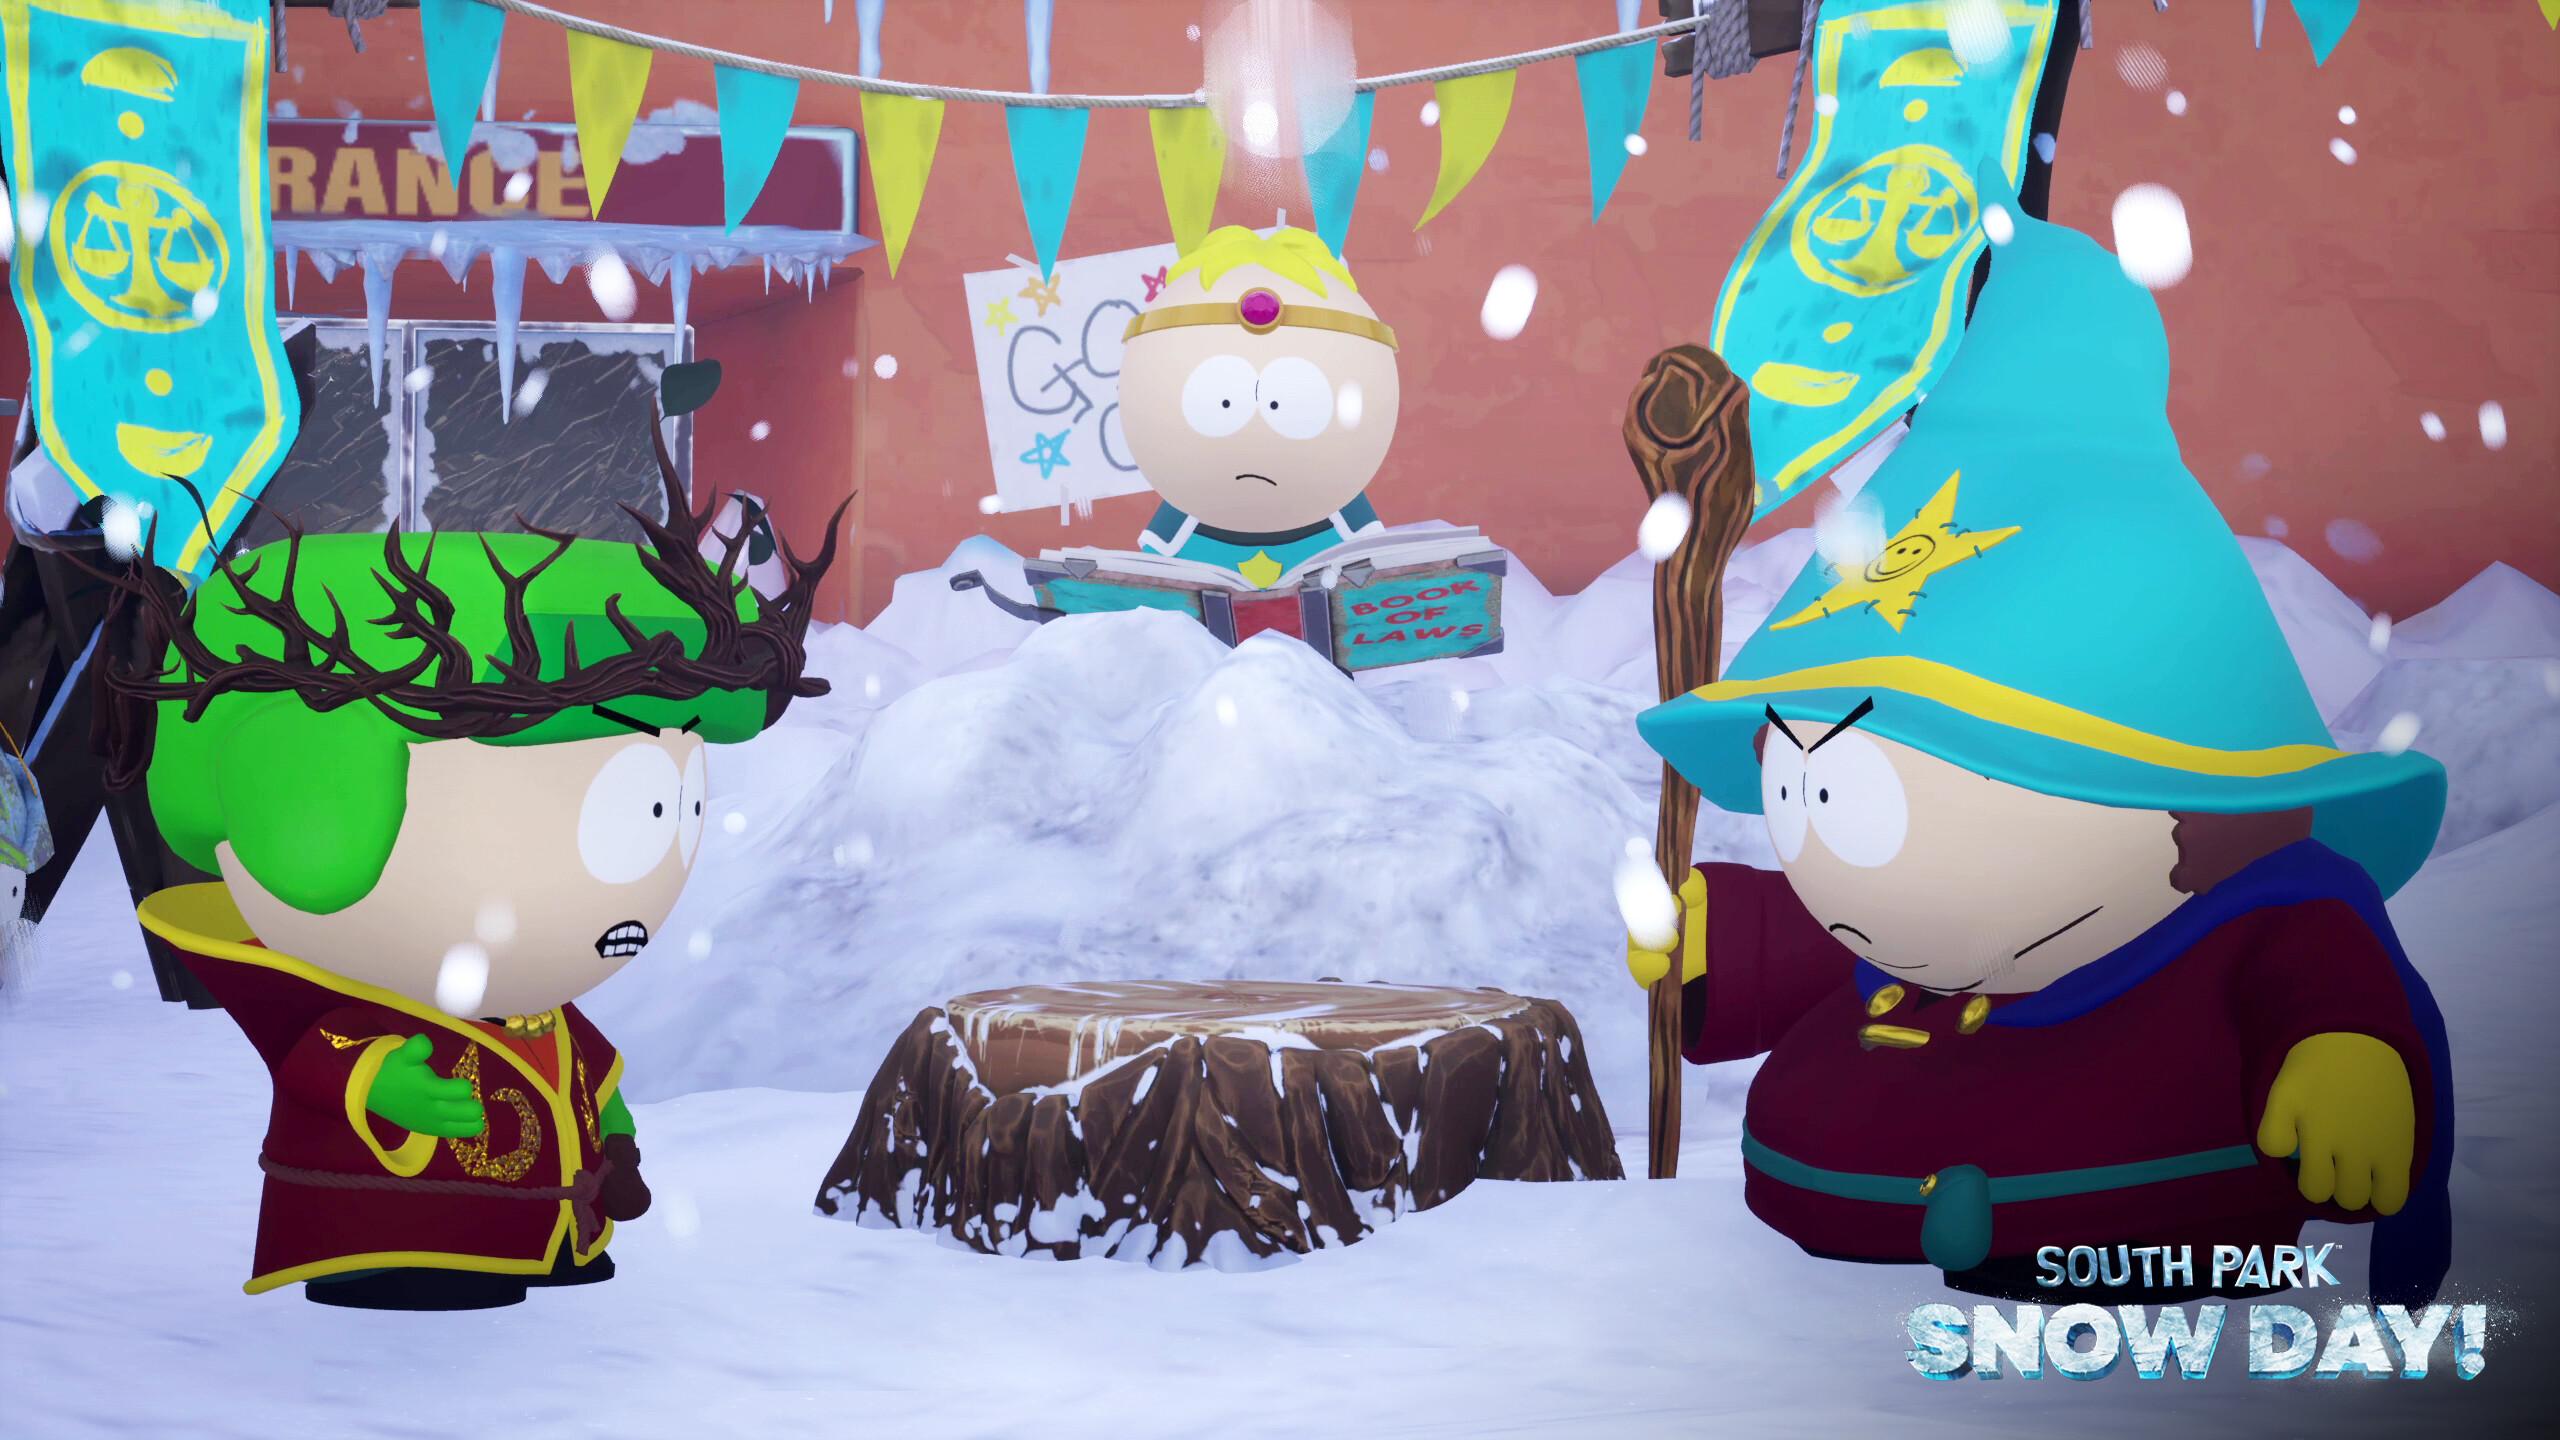 A screenshot from the game South Park: Snow Day